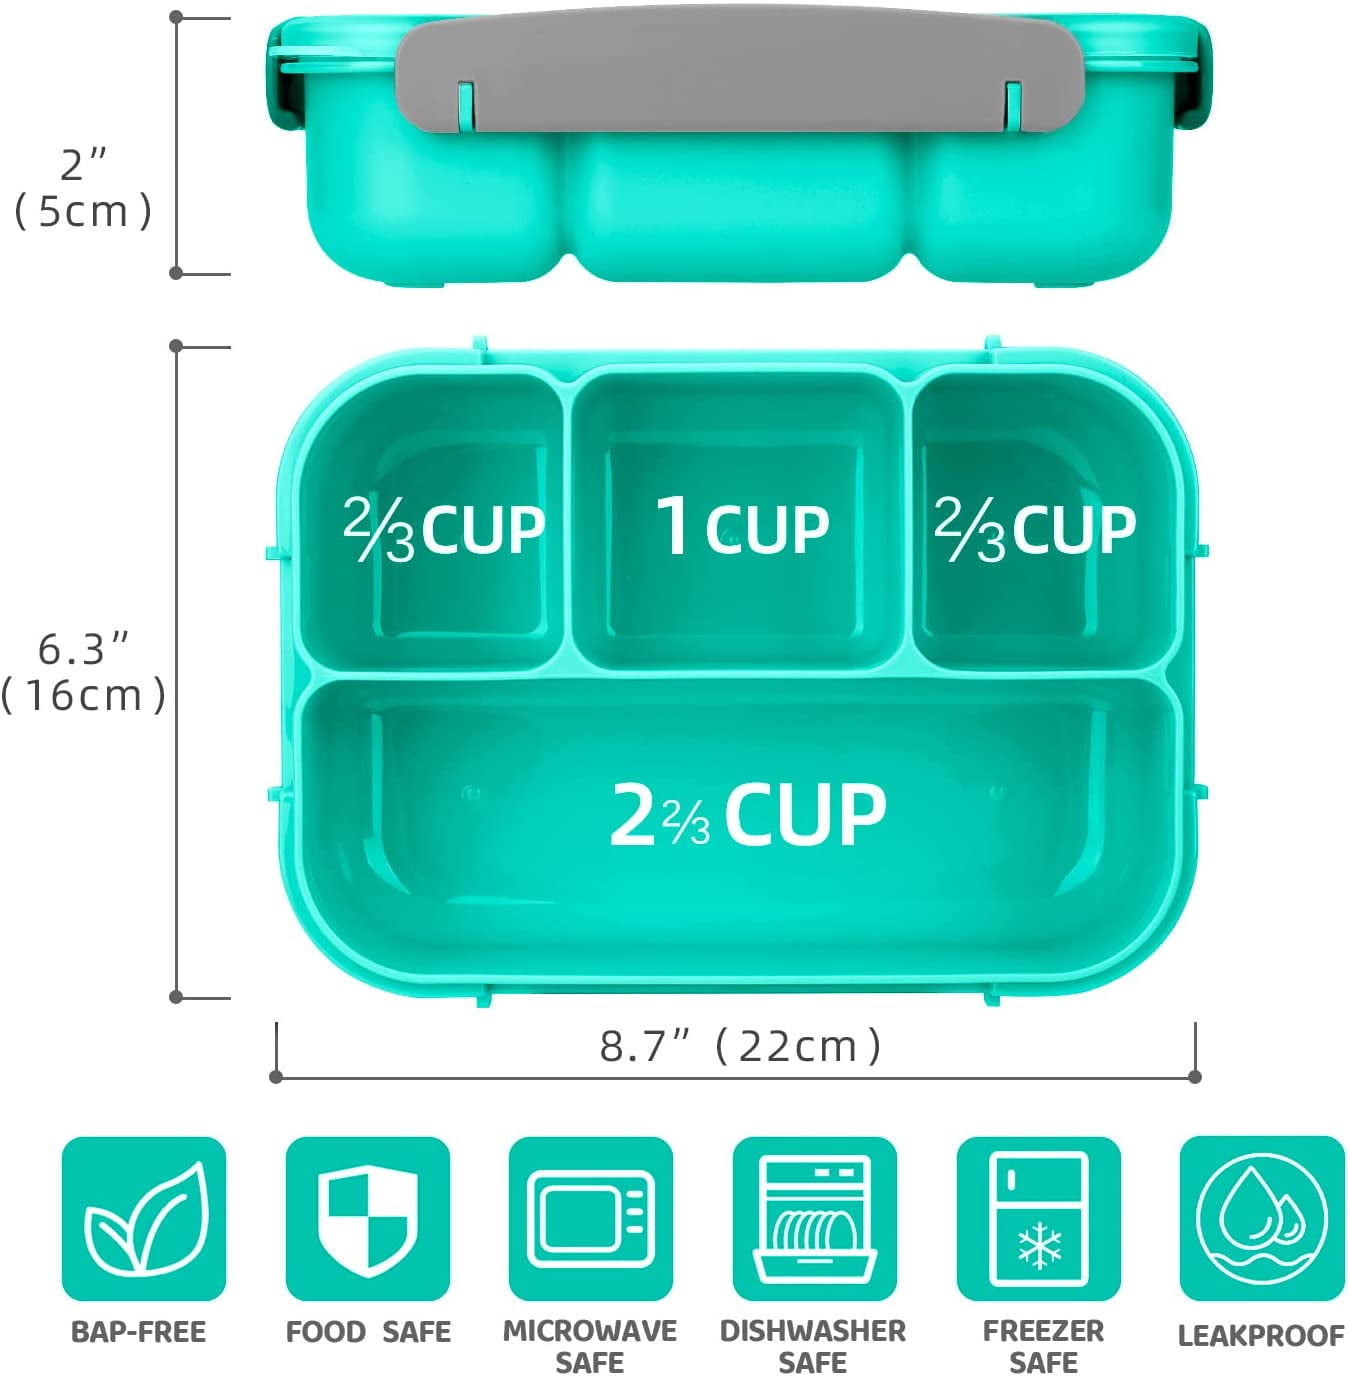 Goodwill Bento Box Lunch Box Kids, Bento Box Adult Lunch Box, Lunch  Containers for Adults/Kids/Toddler, 5 Cup Bento Boxes with 4  Compartments&Fork